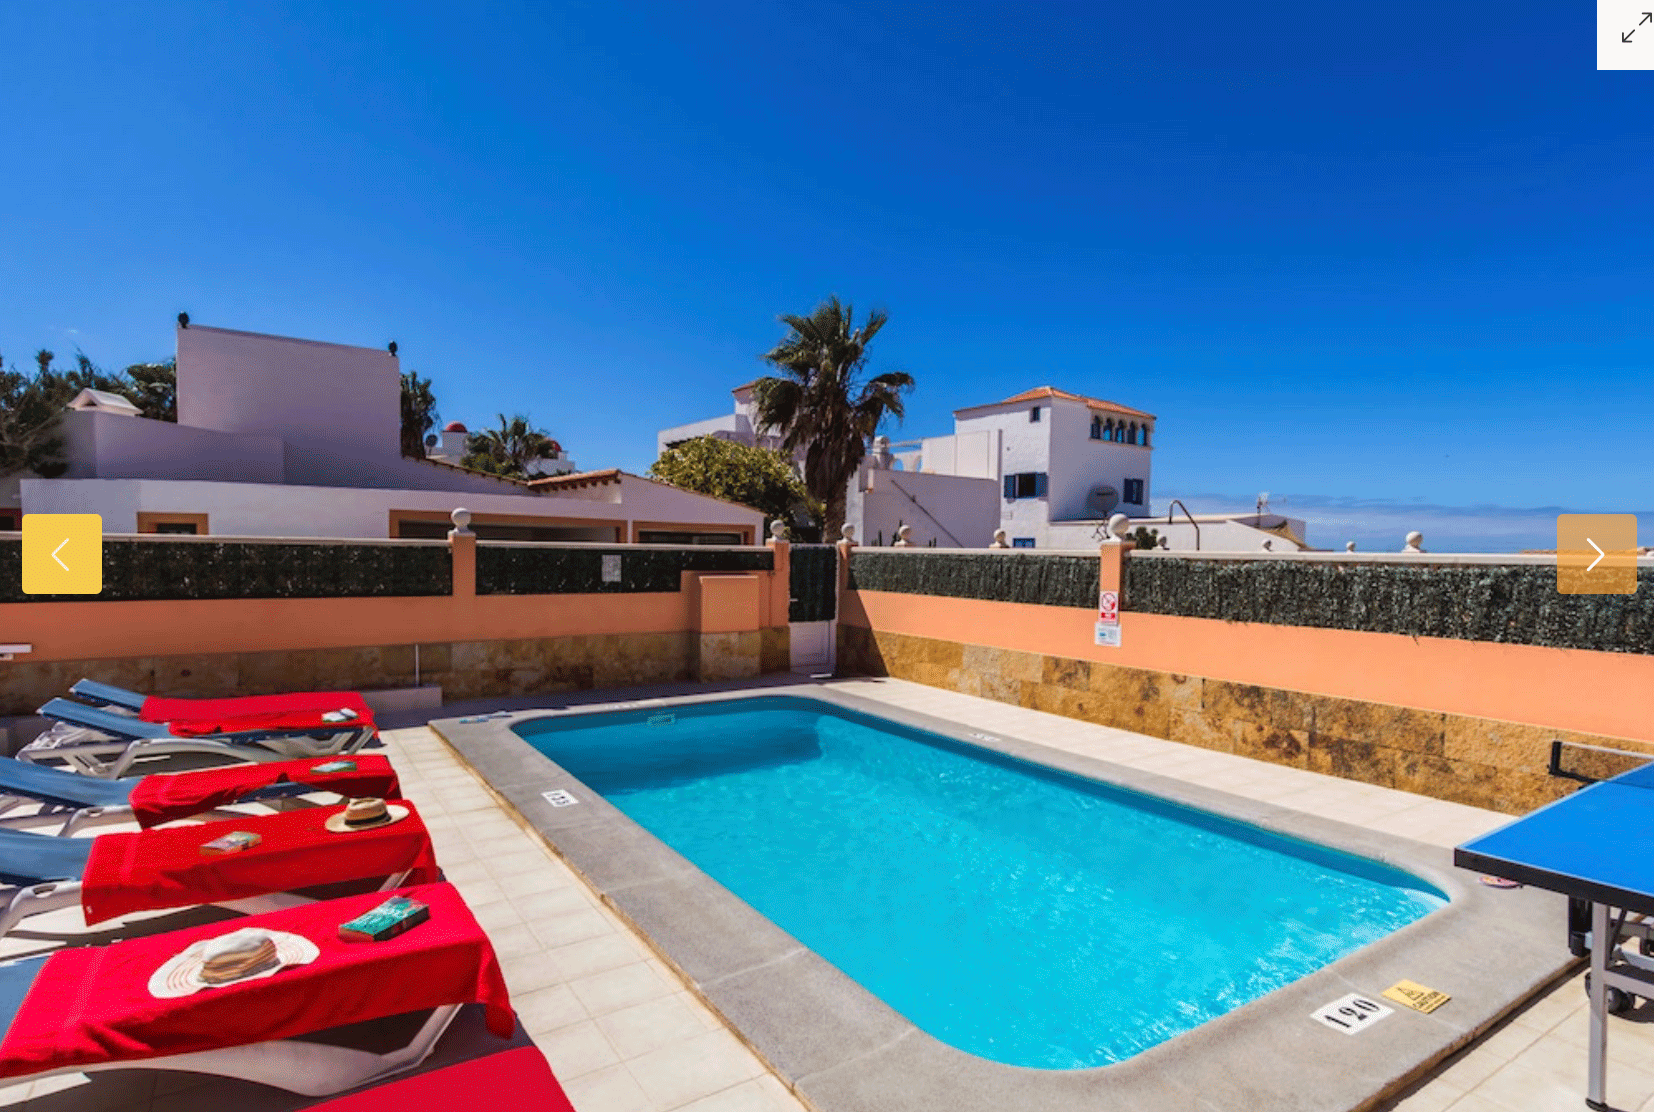 A fantastic seafront villa with pool for sale in Corralejo